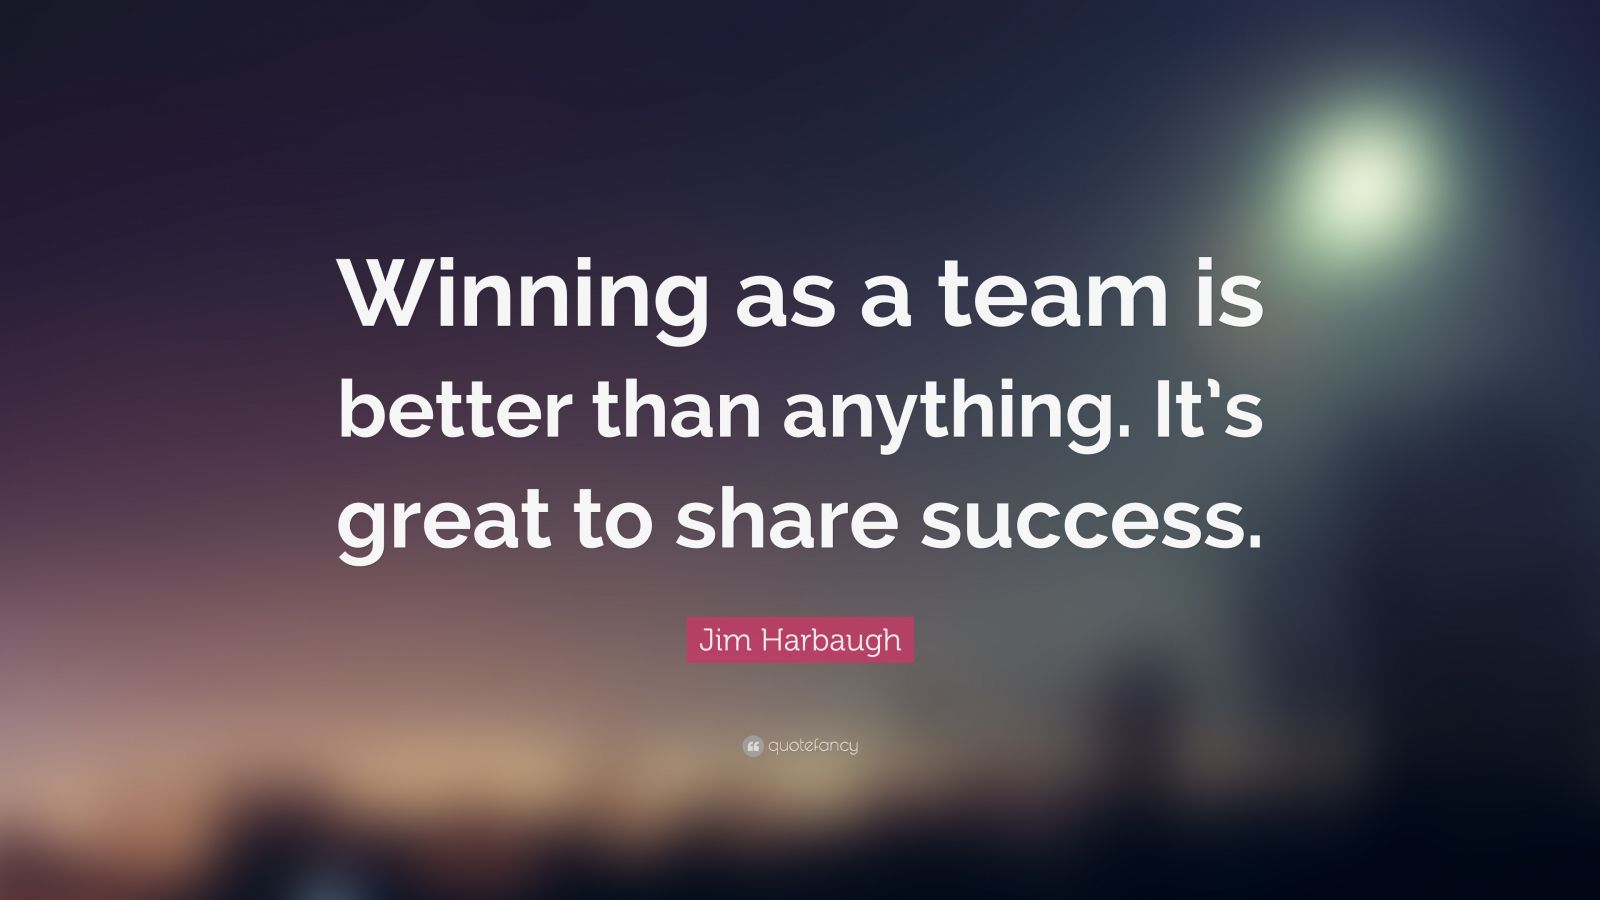 Jim Harbaugh Quote: “Winning as a team is better than anything. It’s ...